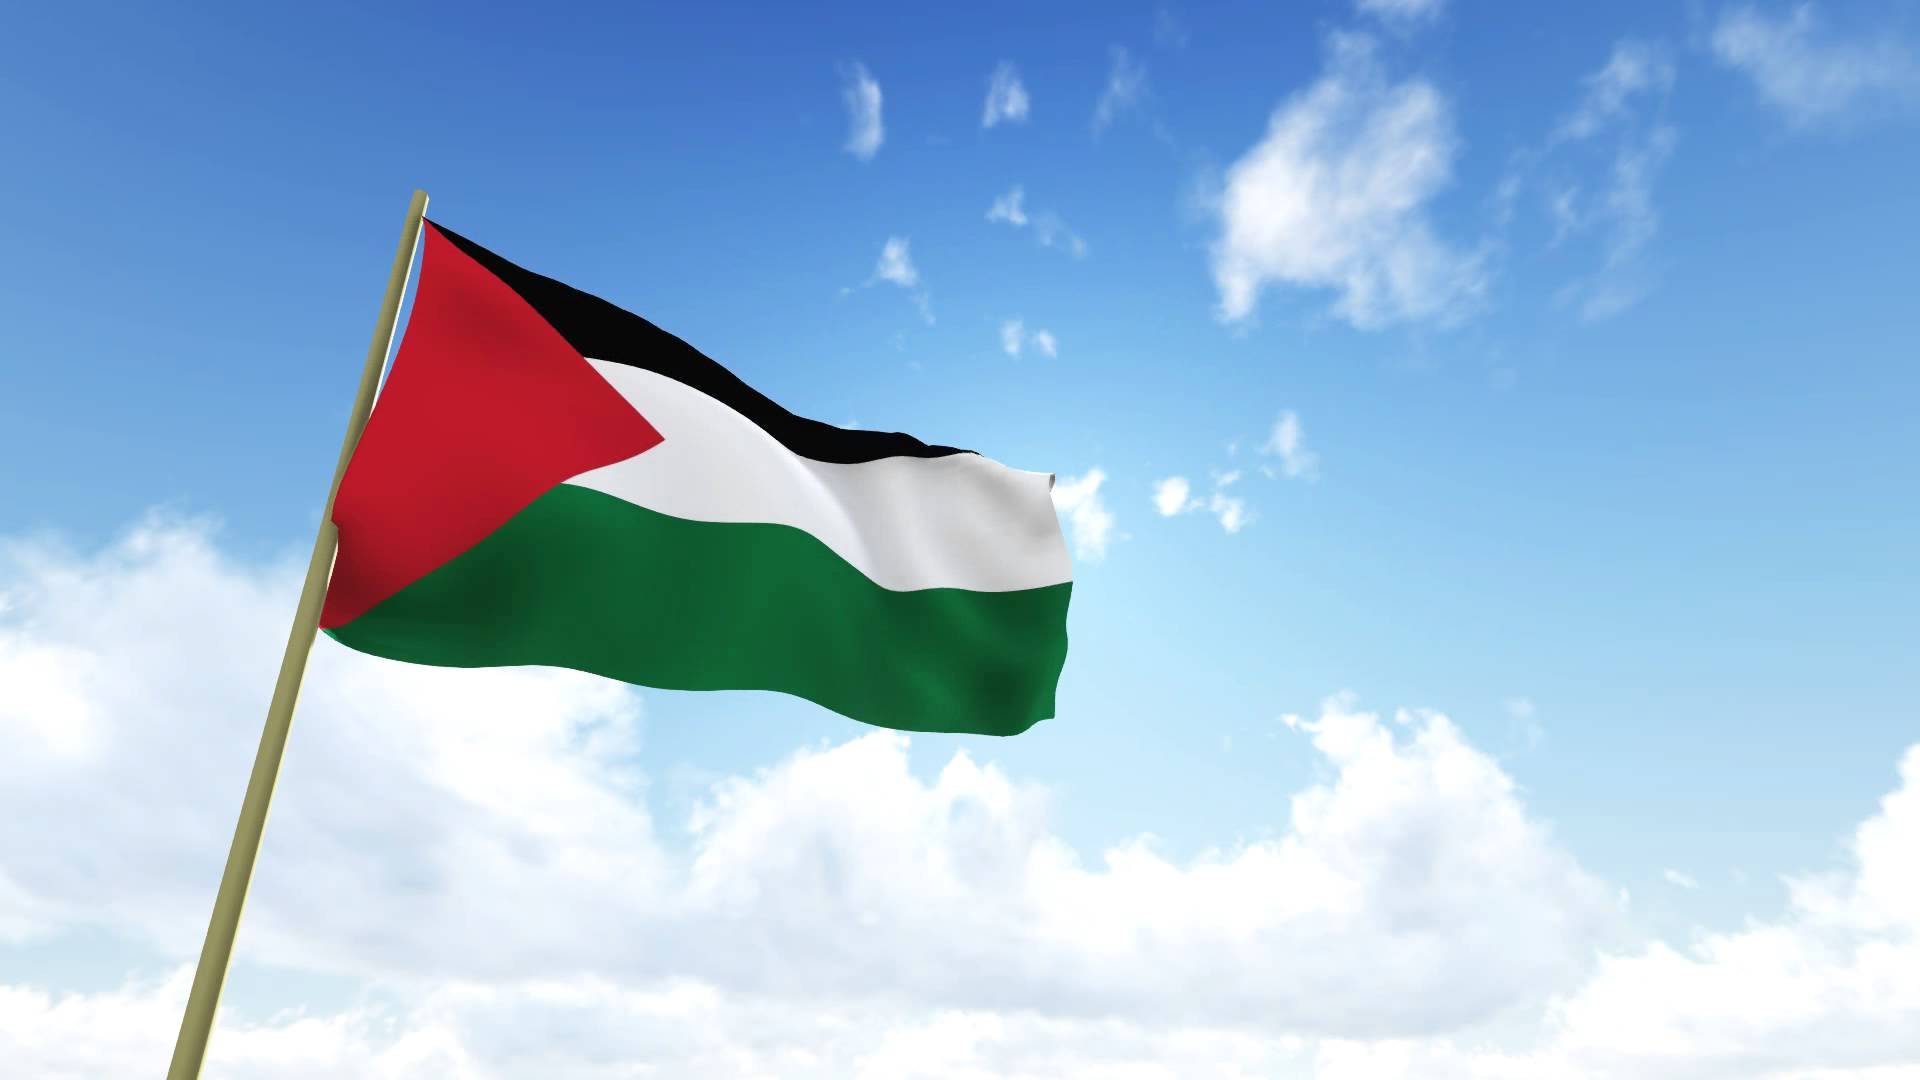 Palestine Flag Wallpapers - Wallpaper Cave